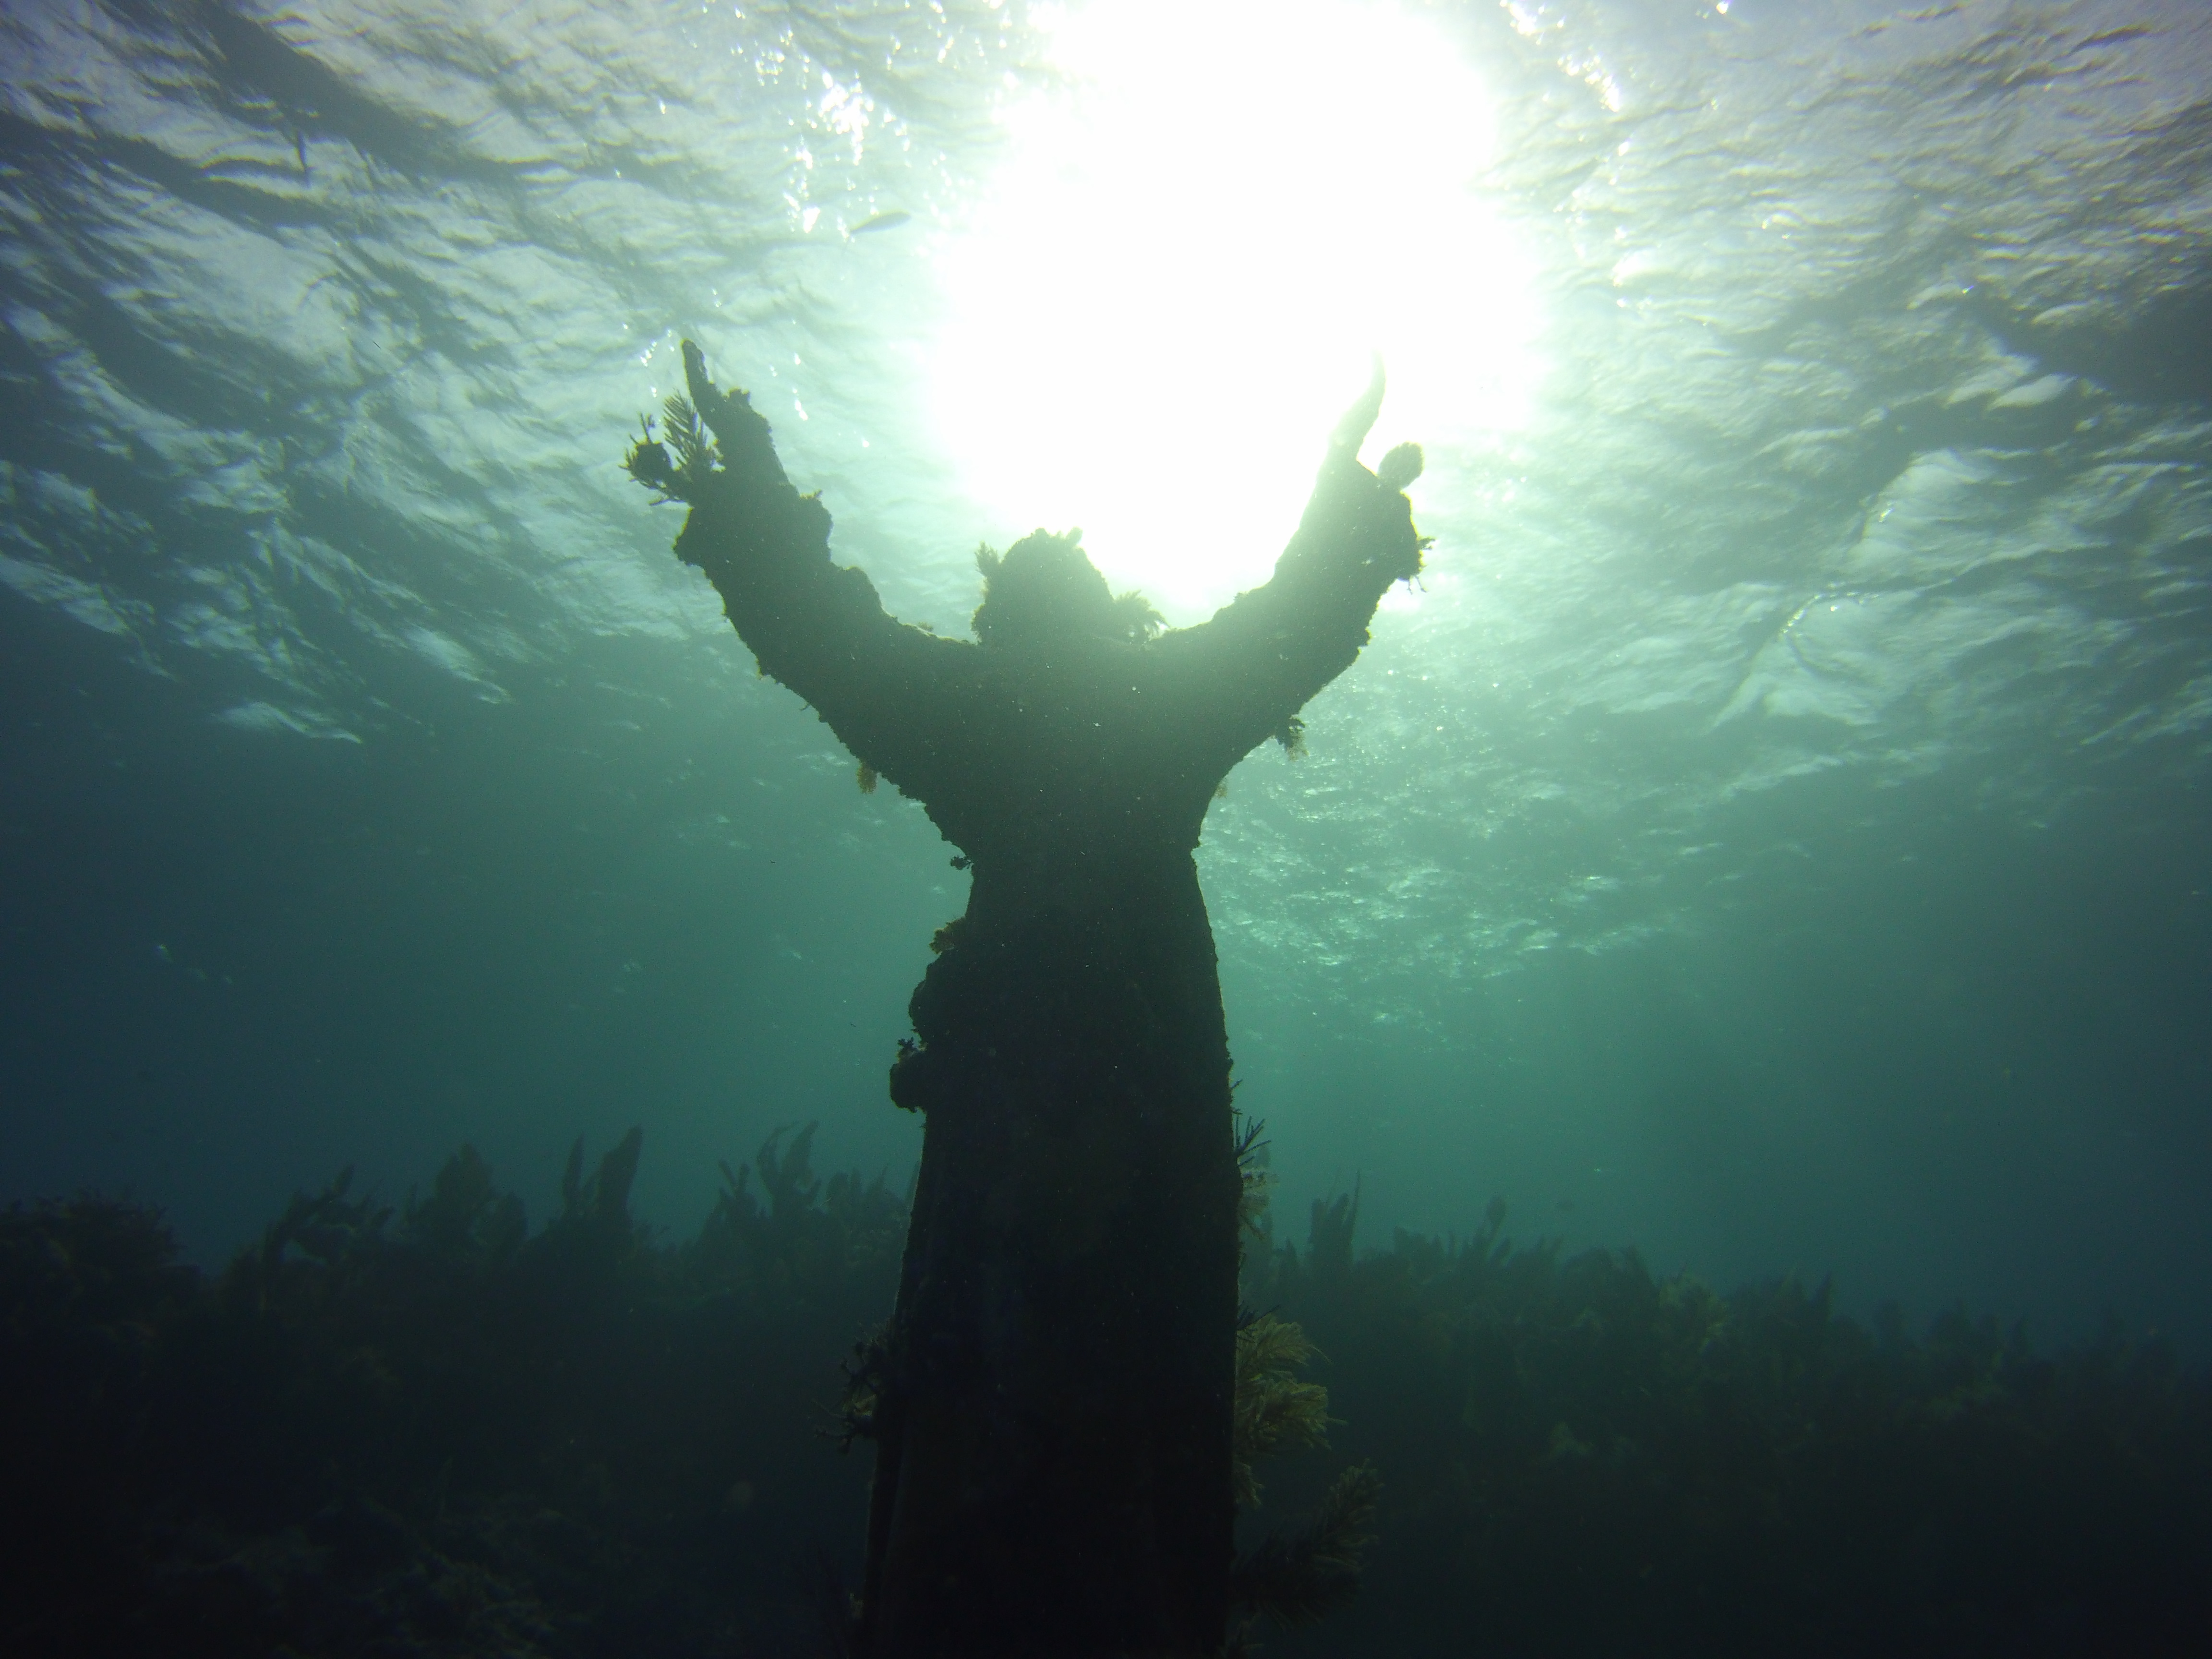 Christ of the abyss at key largo dry rocks florida